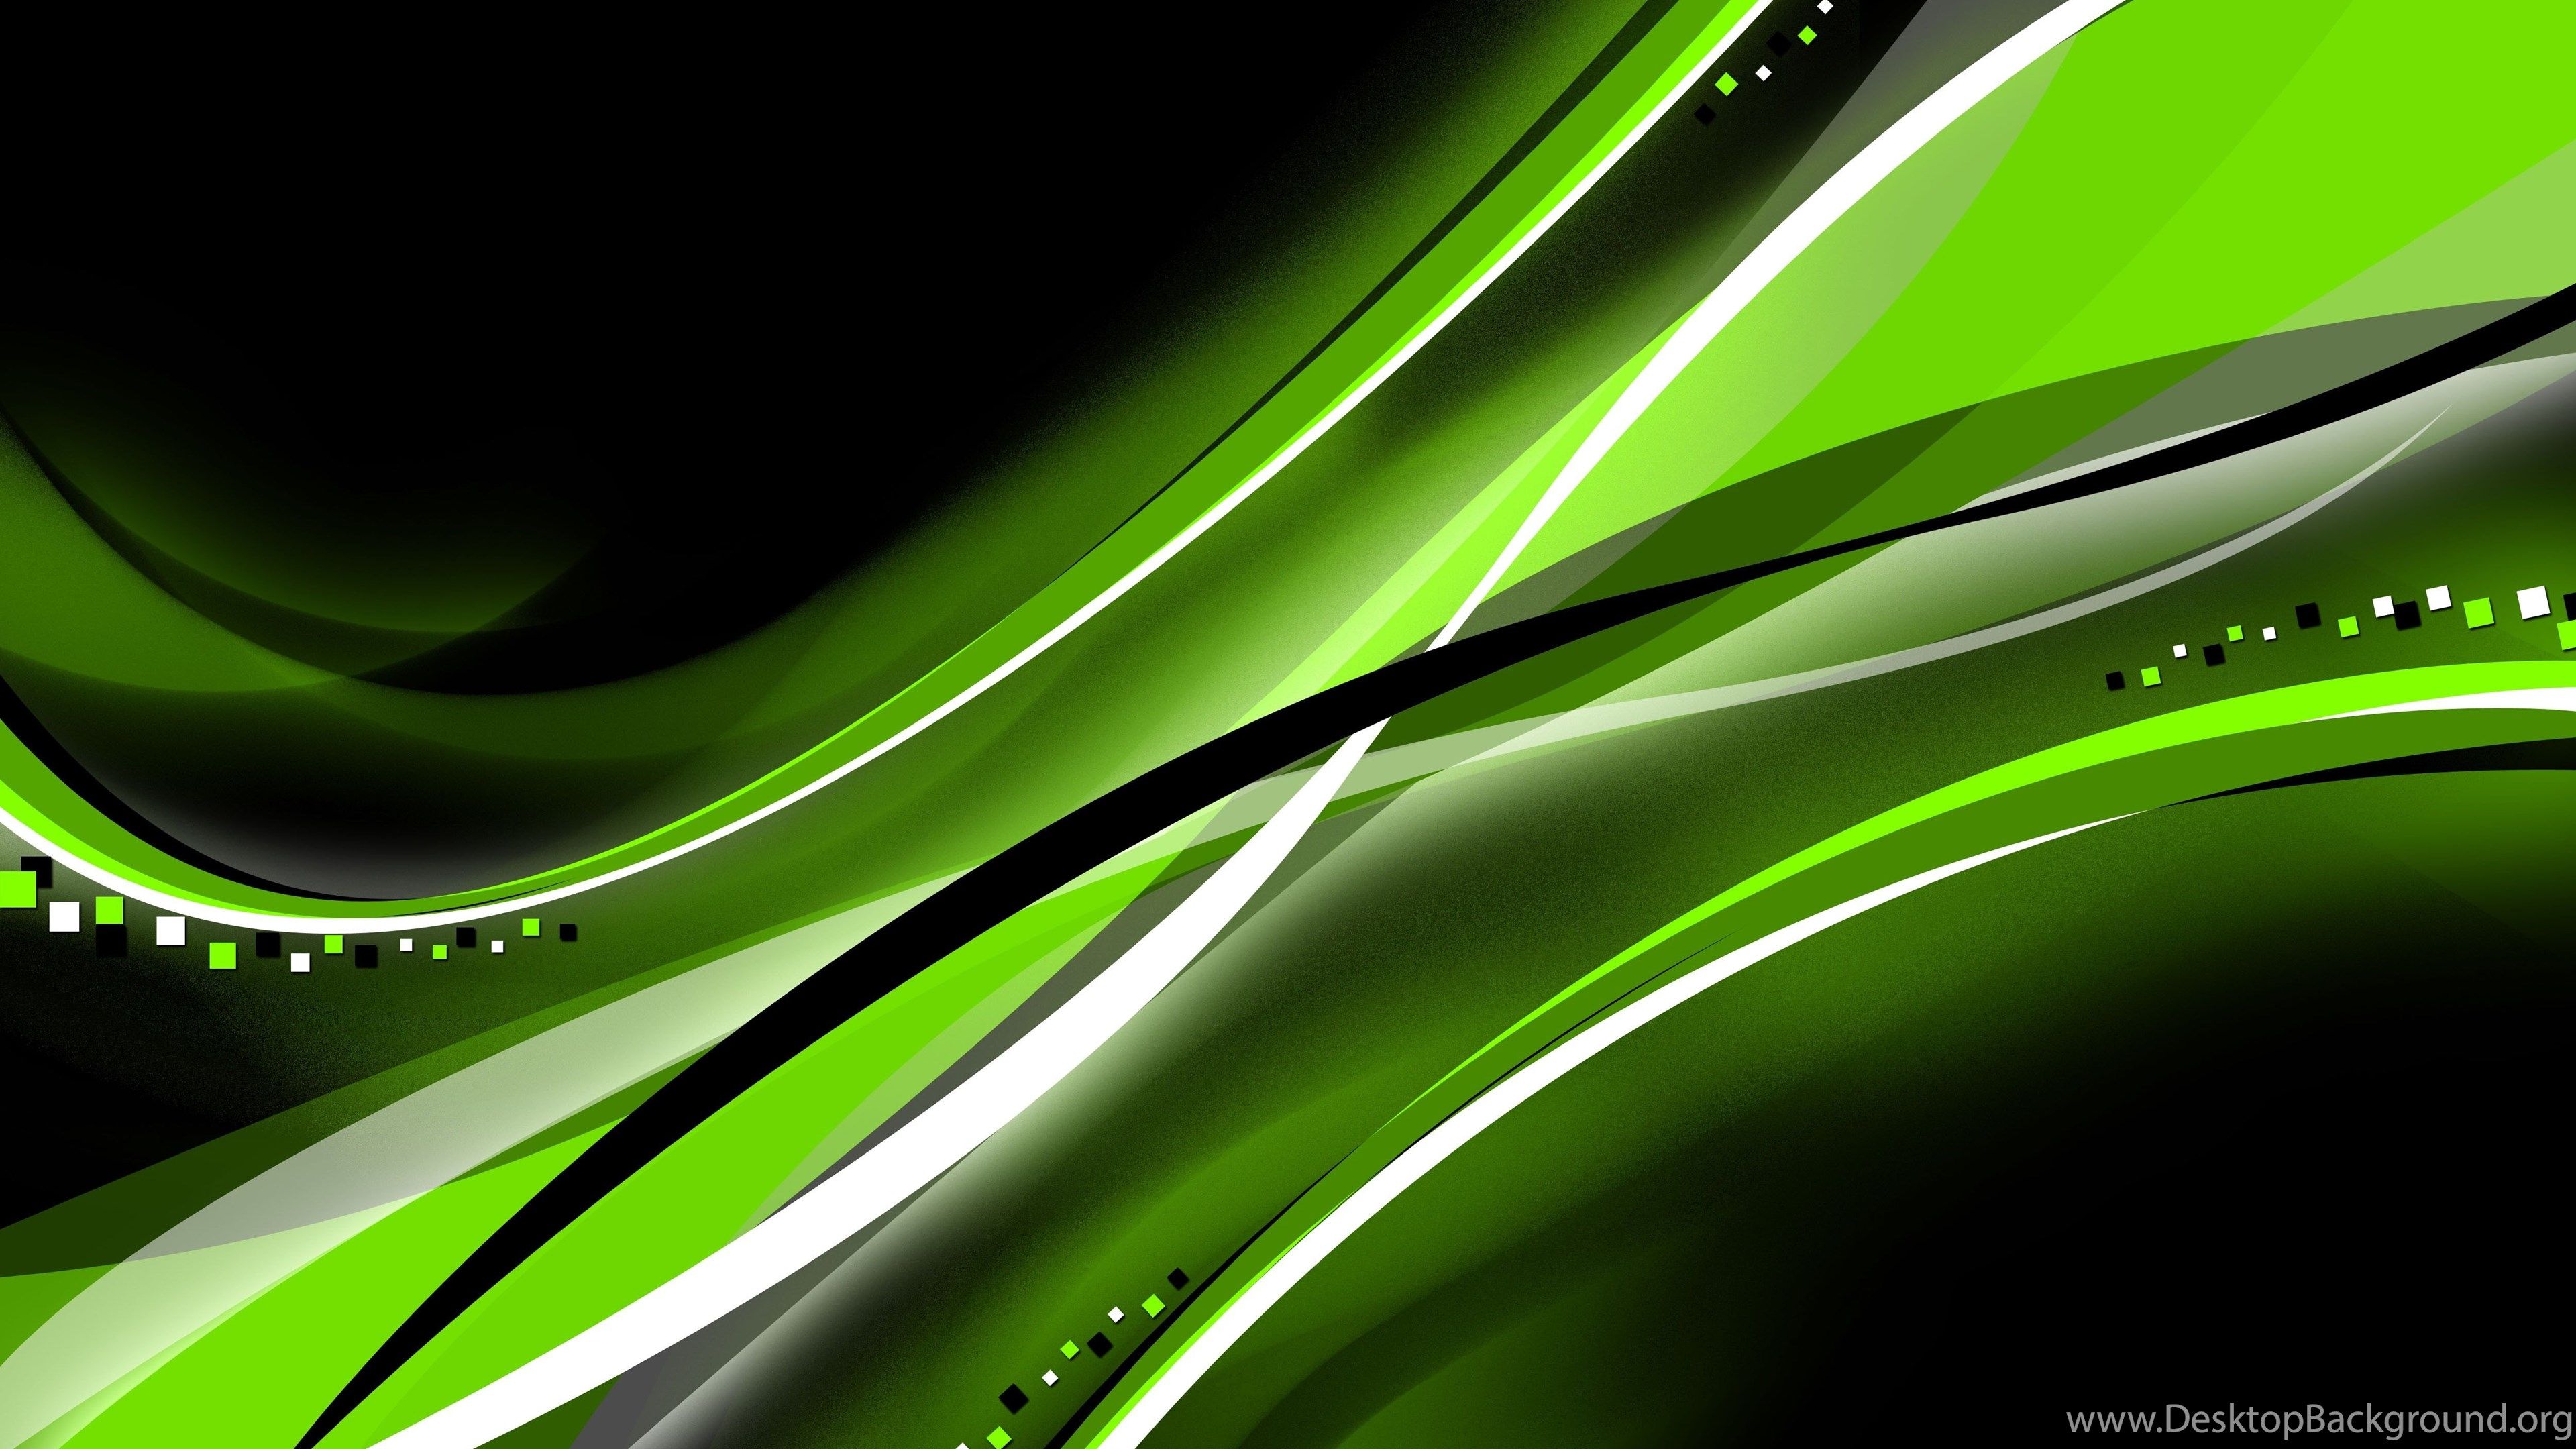 Green And Black Abstract Background